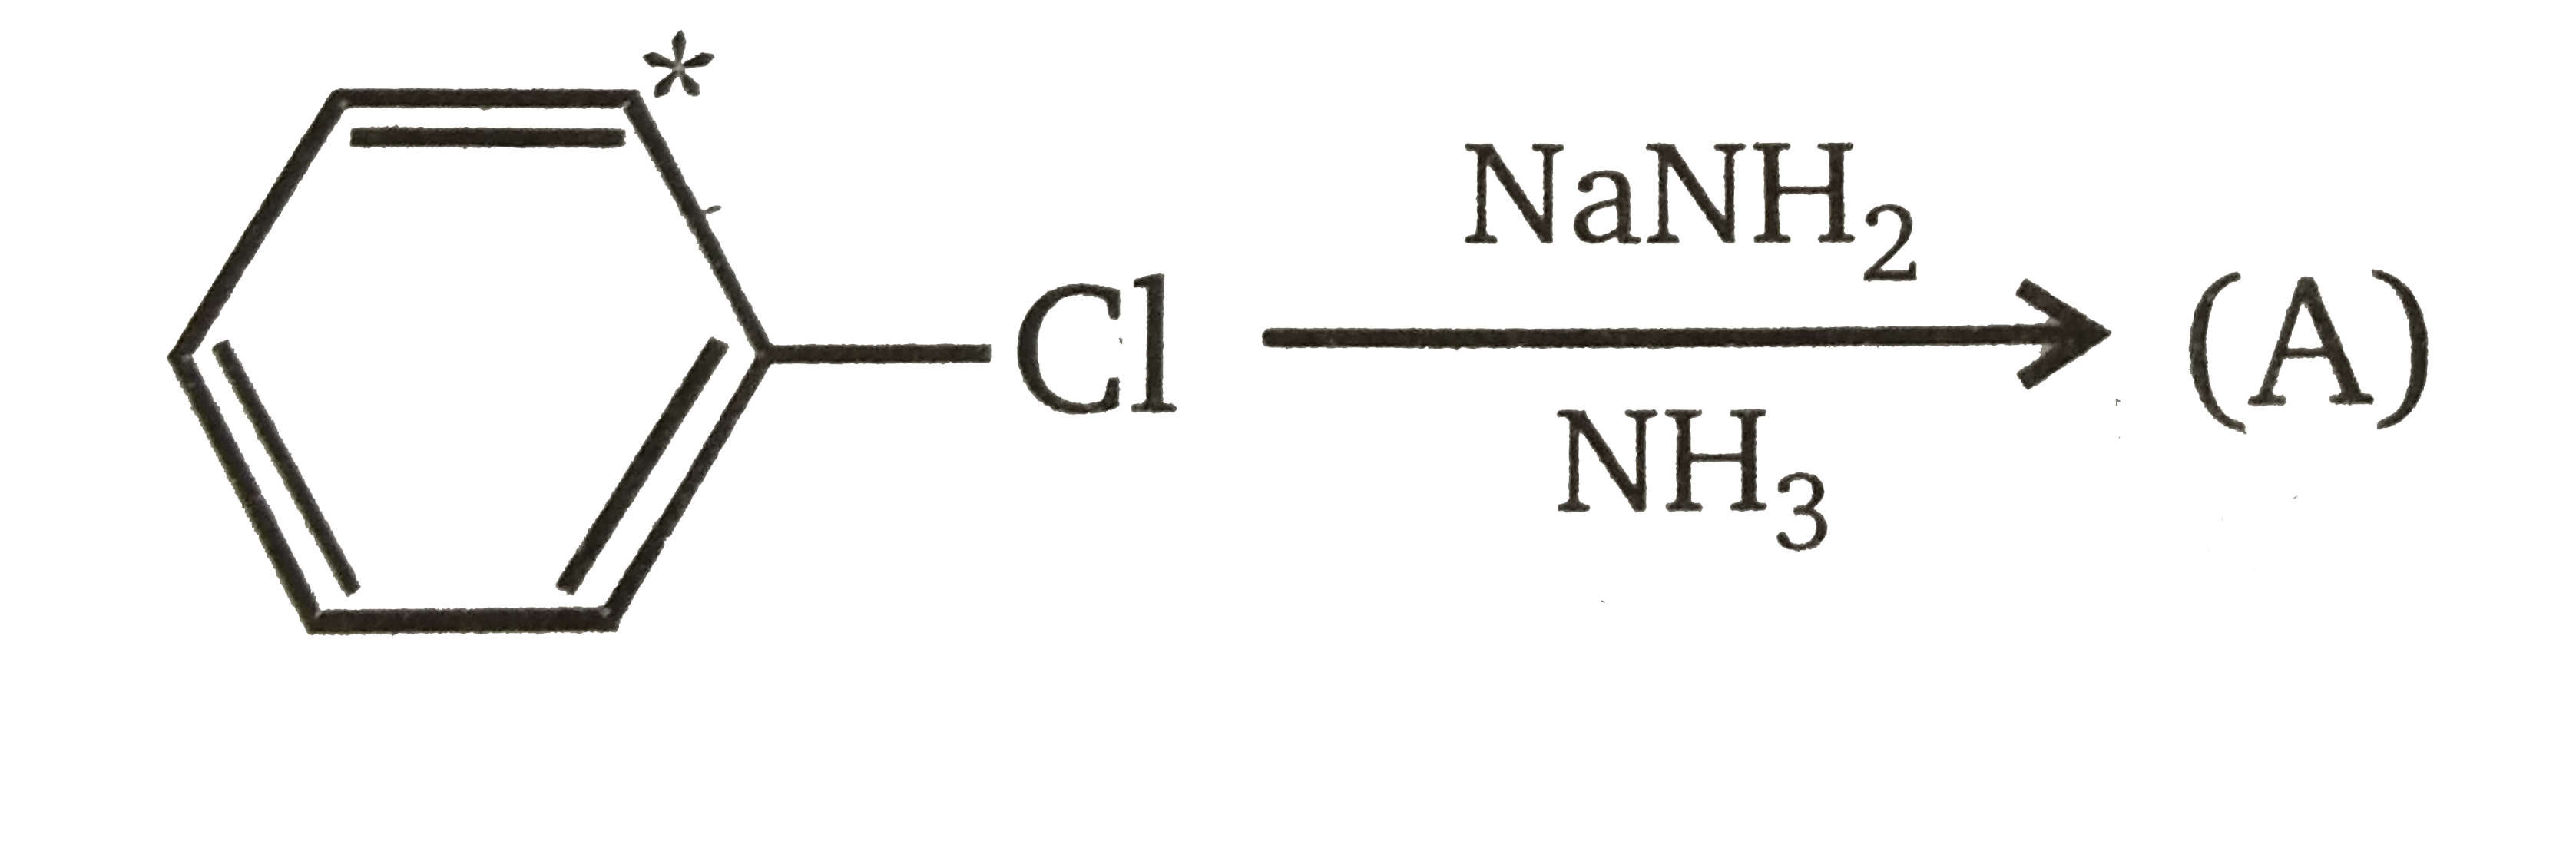 Two benzyne intermediates are likely to be formed equally. Reaction with amide ion can occur in two different directions with each benzyne, giving three possible products. They are formed in a 1 : 2 : 1 ratio. Asterisk (*) refers to .^(14)C.    Major product (A) is: